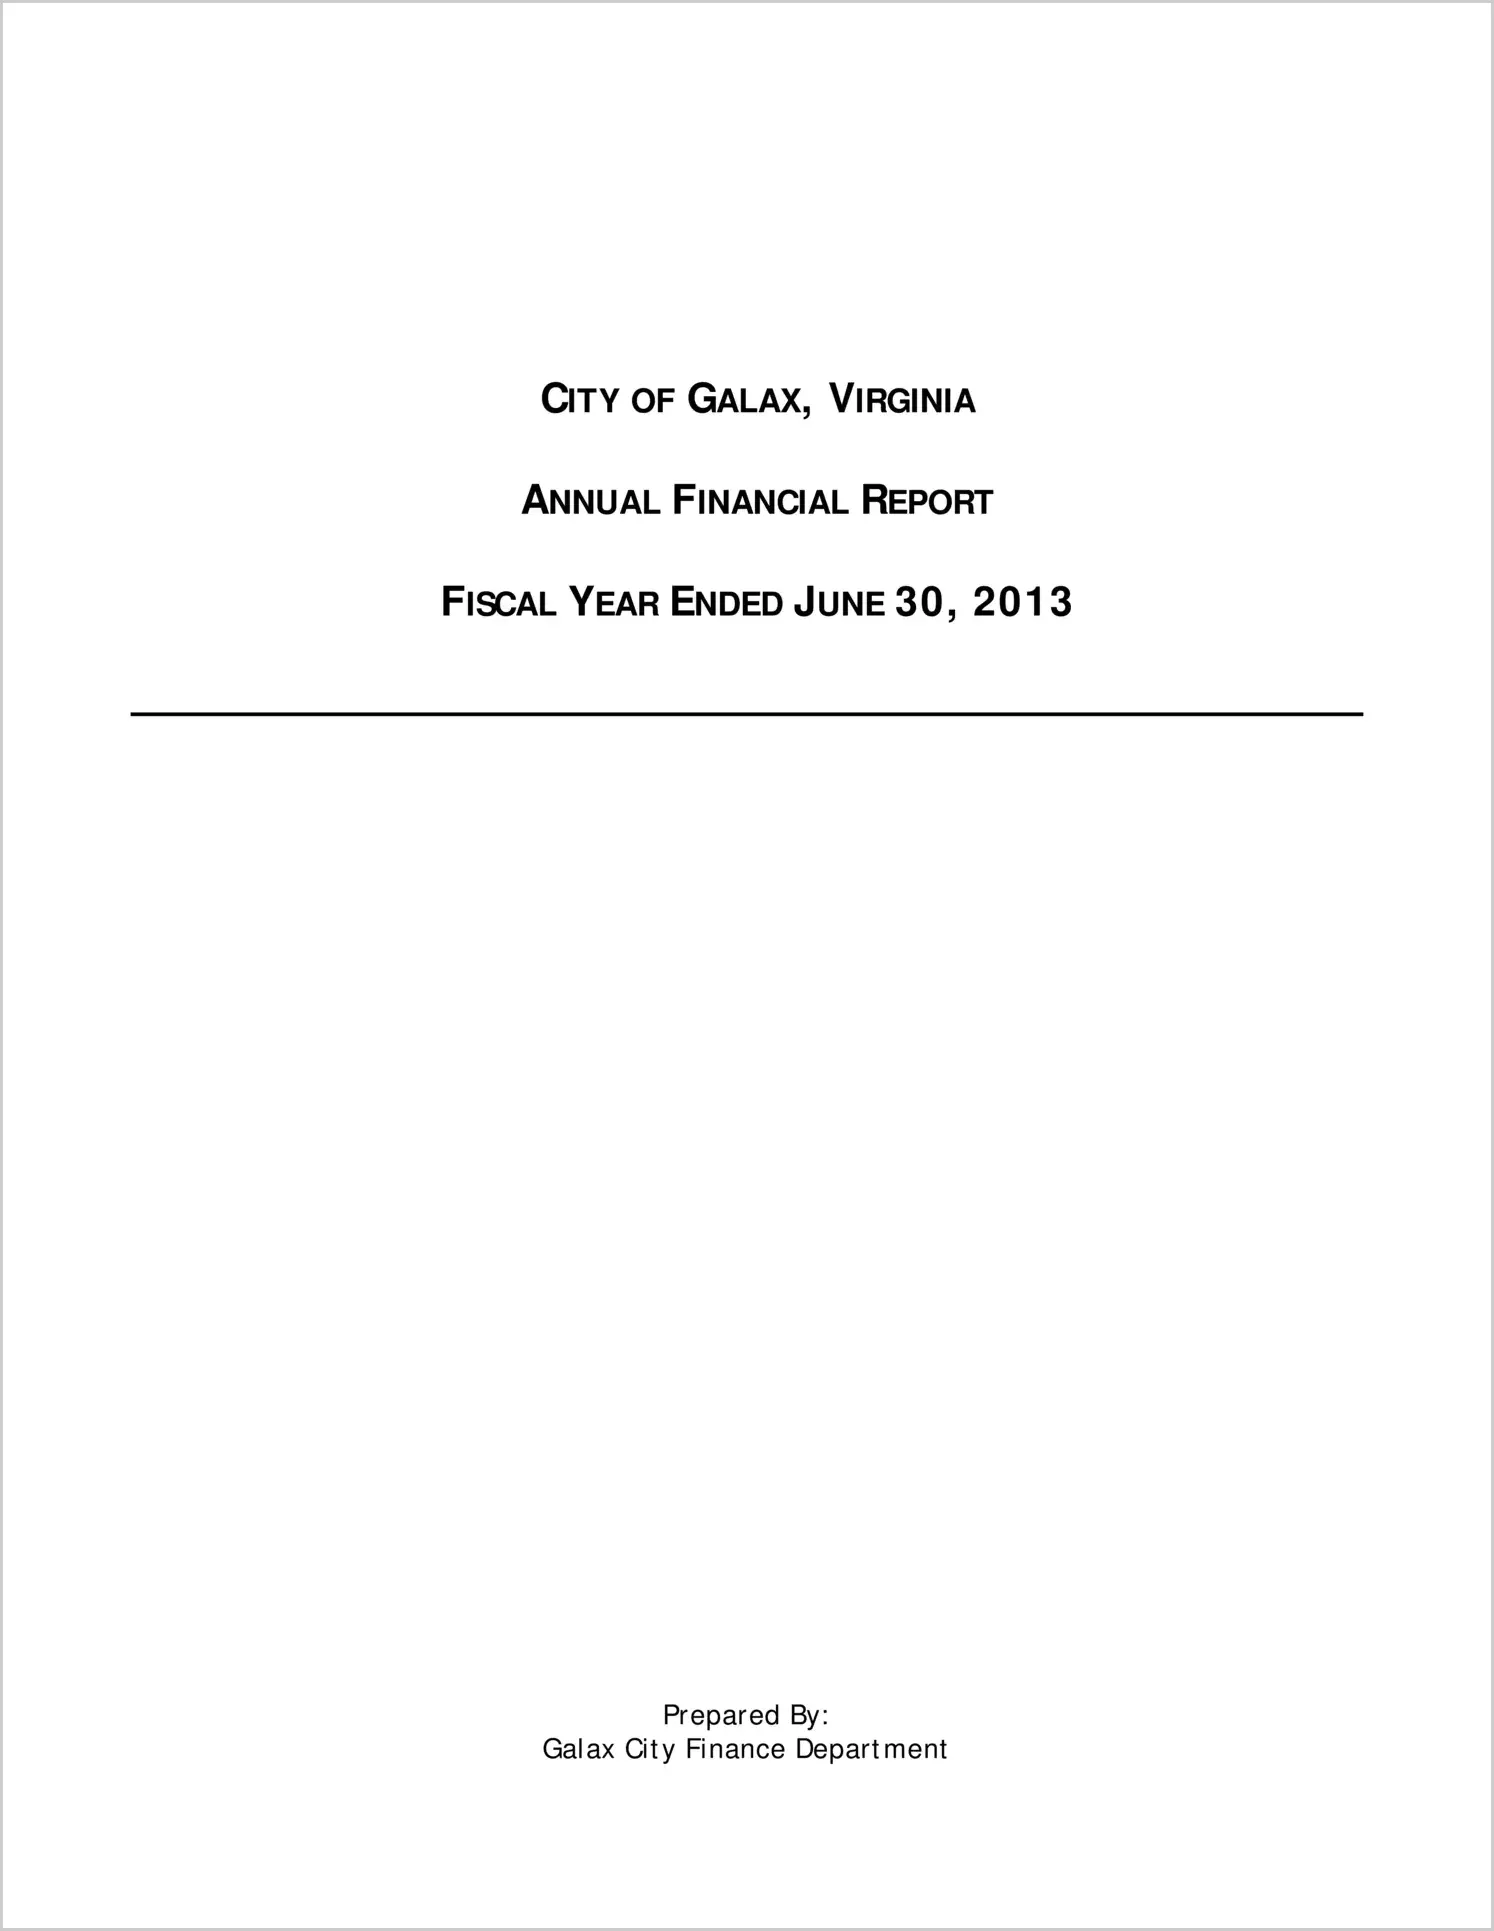 2013 Annual Financial Report for City of Galax